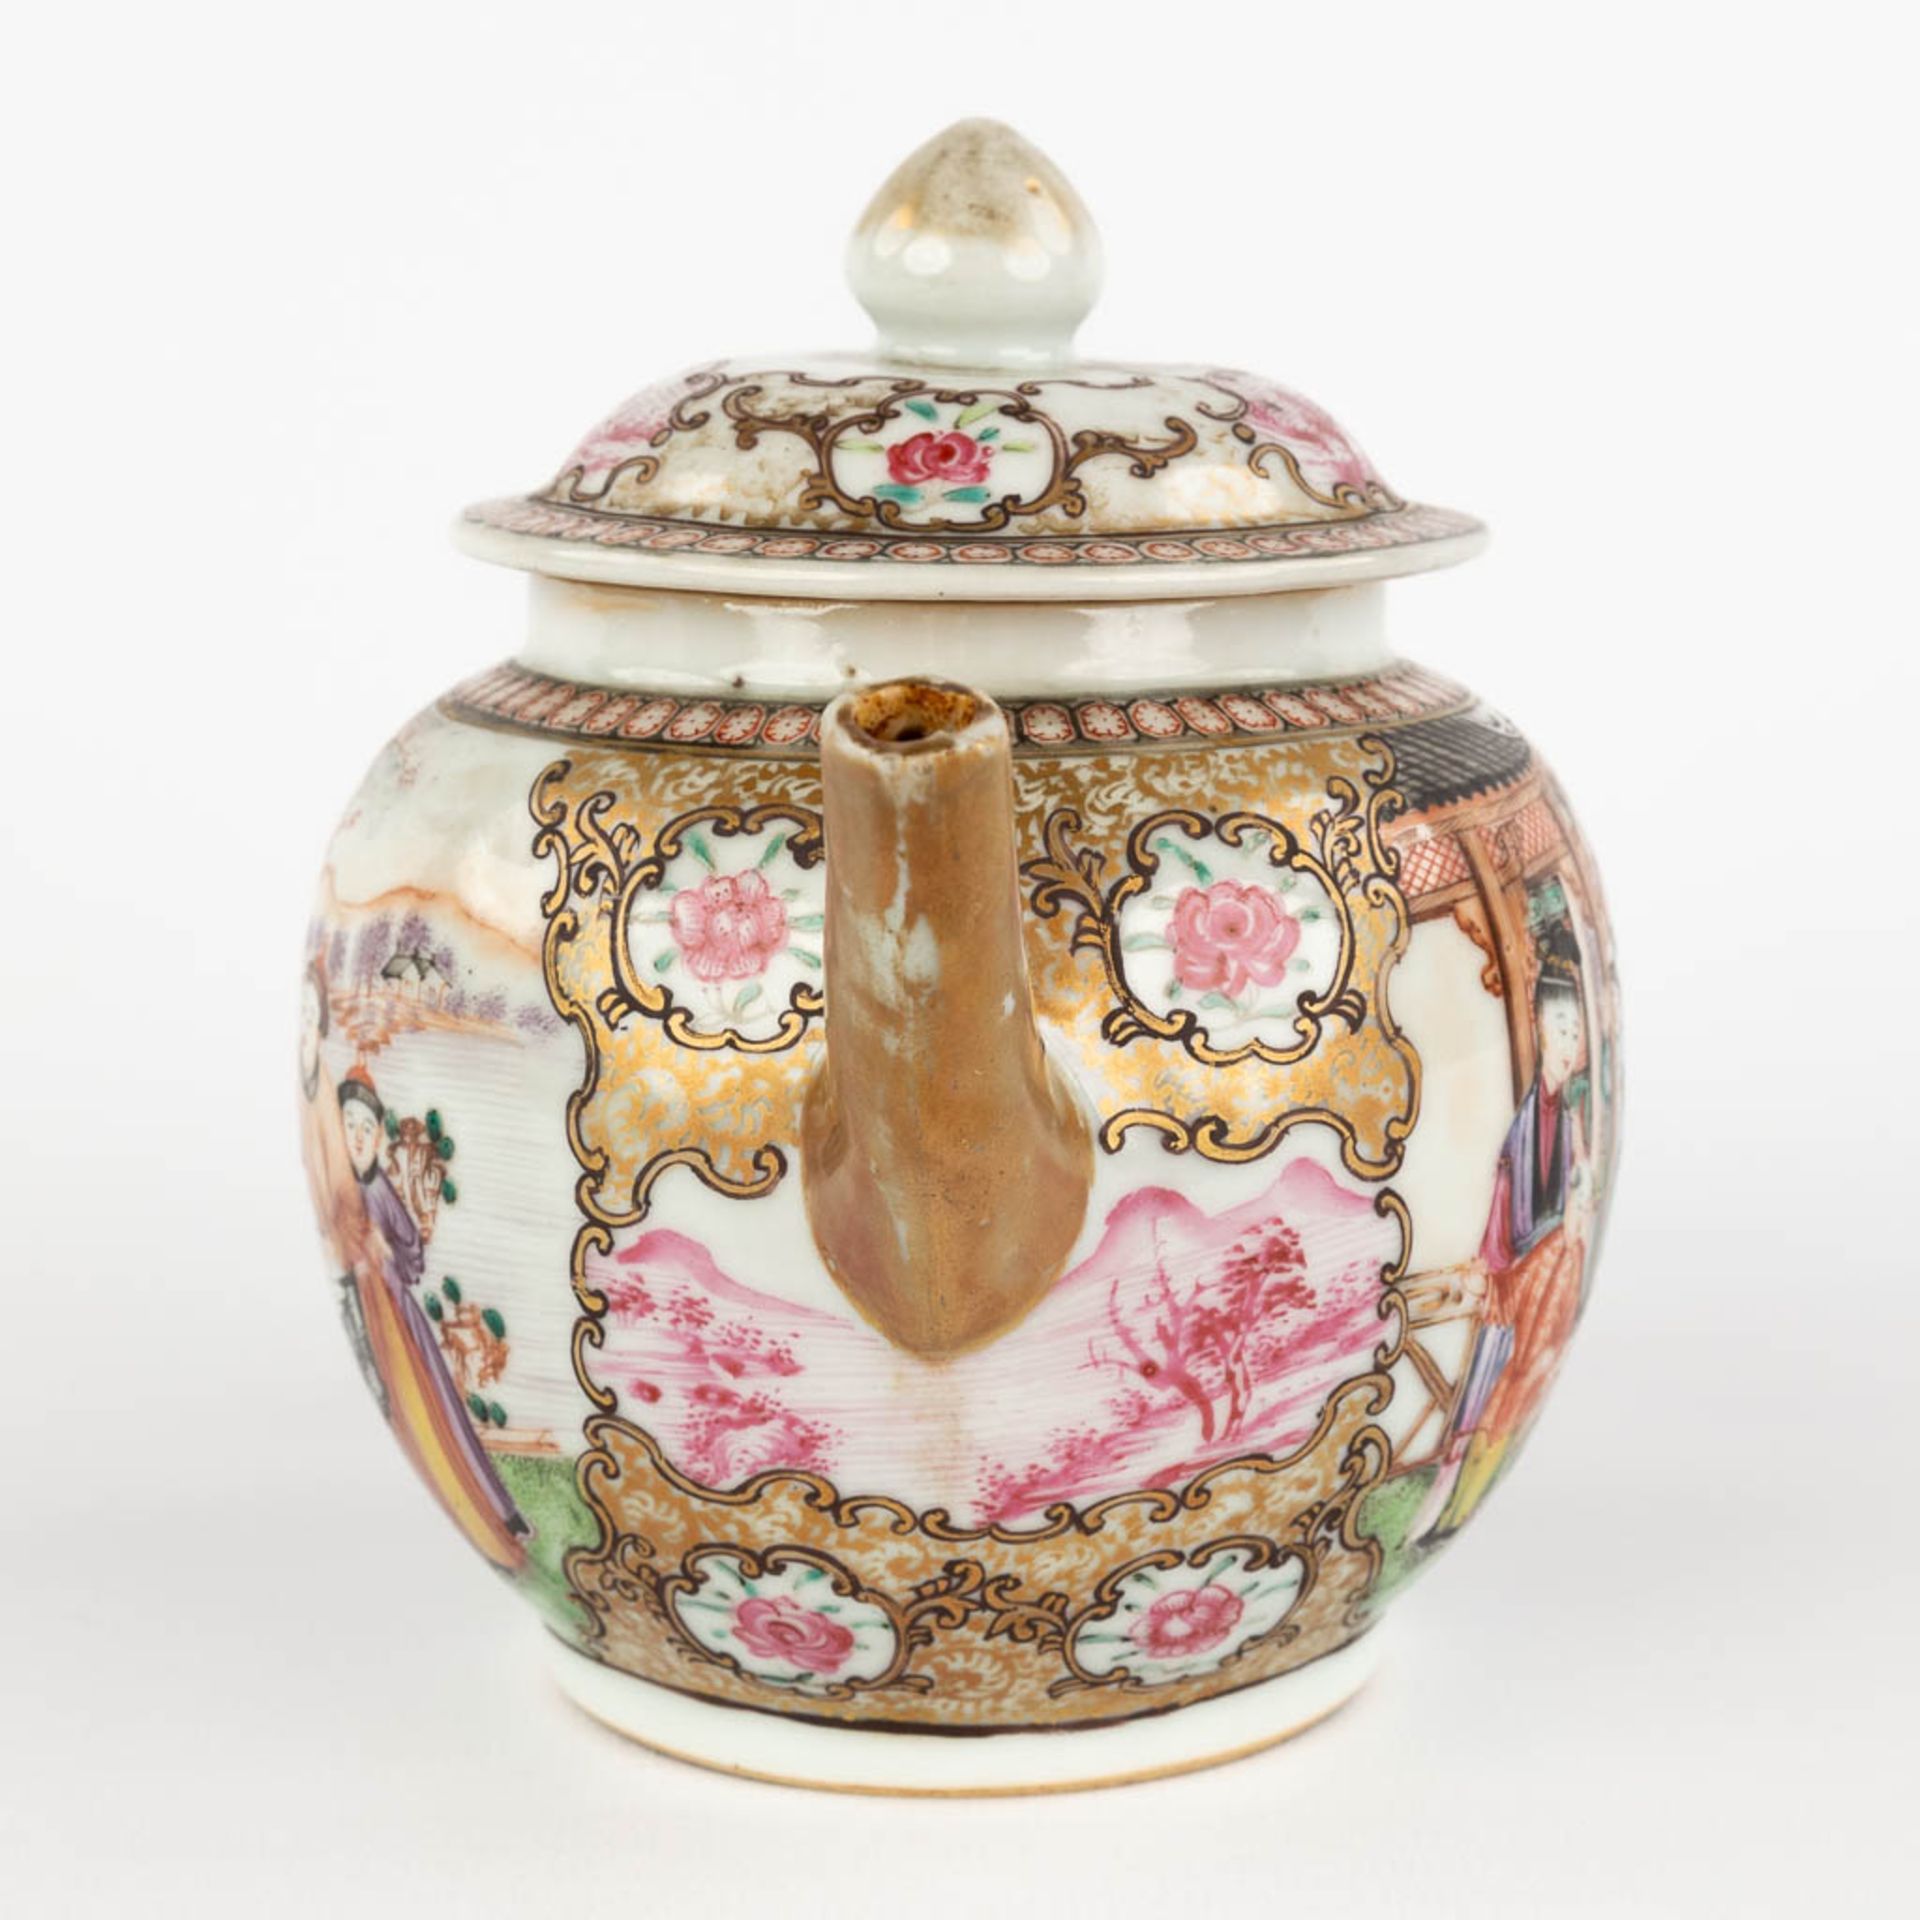 An antique Chinese Famille Rose teapot with a Family Scne, Qinalong, 18th C. (L:11 x W:20 x H:12,5 - Image 5 of 12